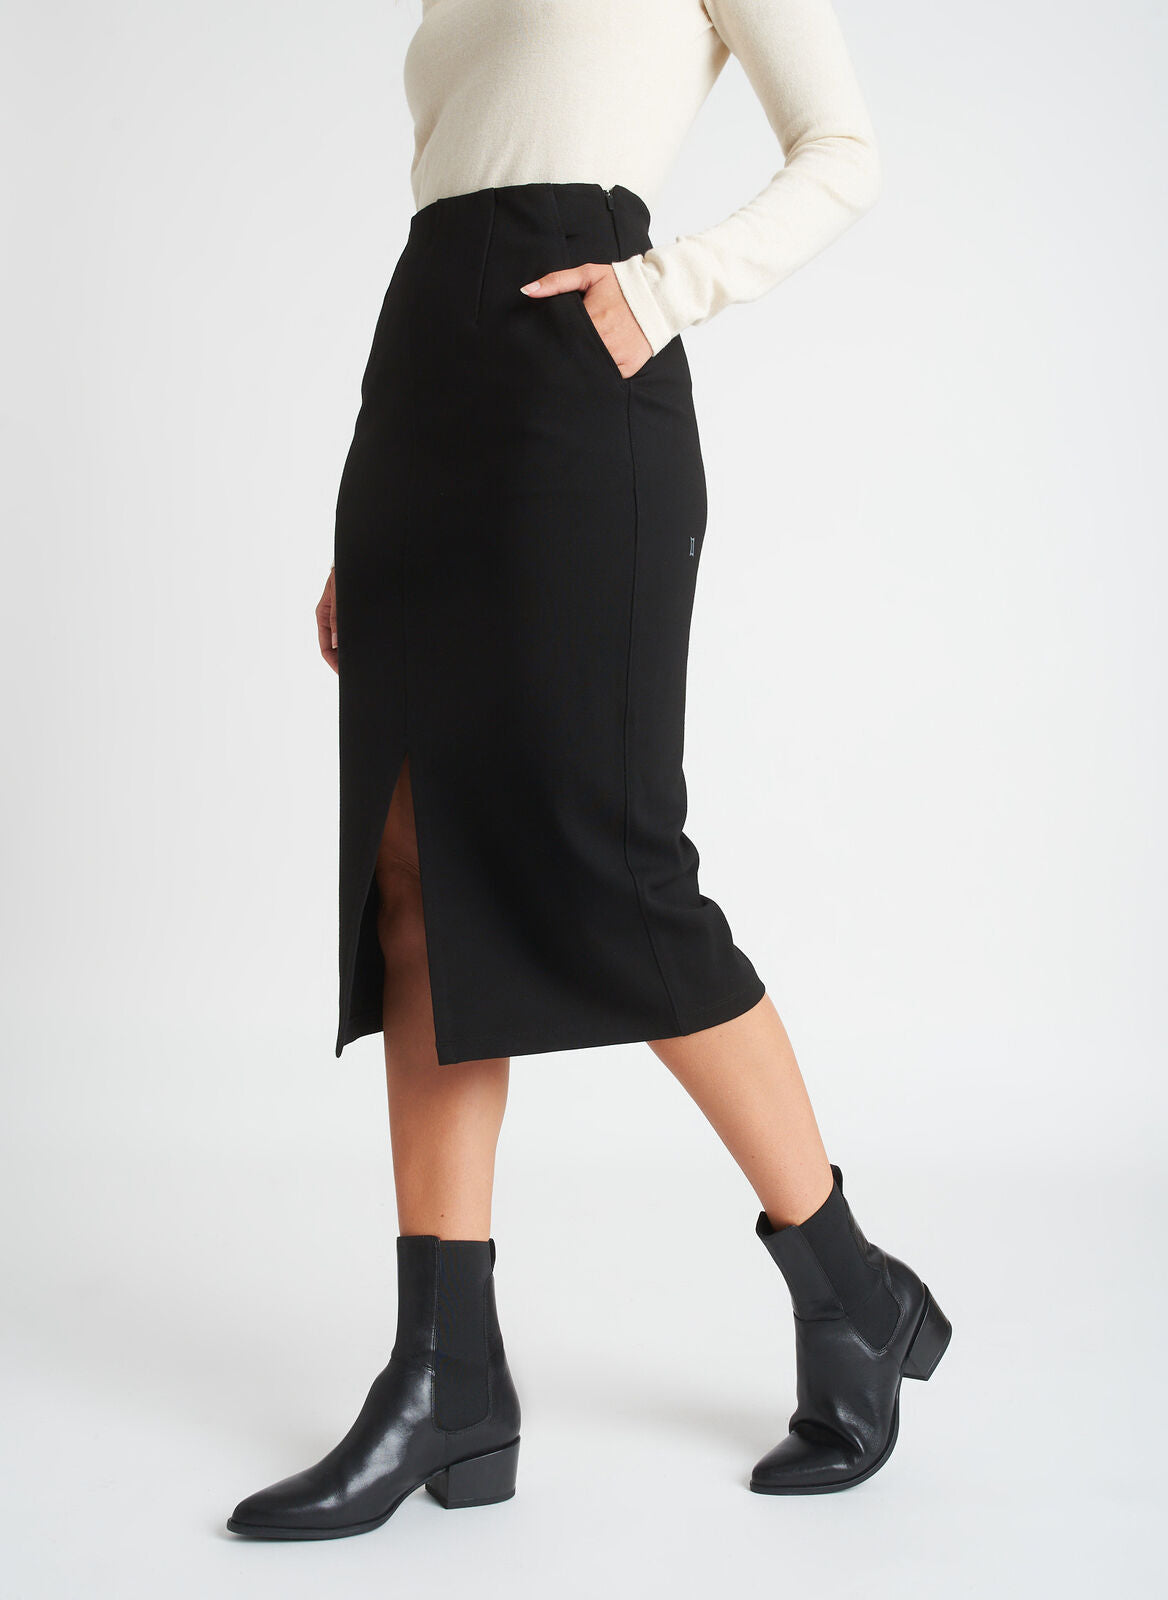 Serenity Double Knit Pencil Skirt